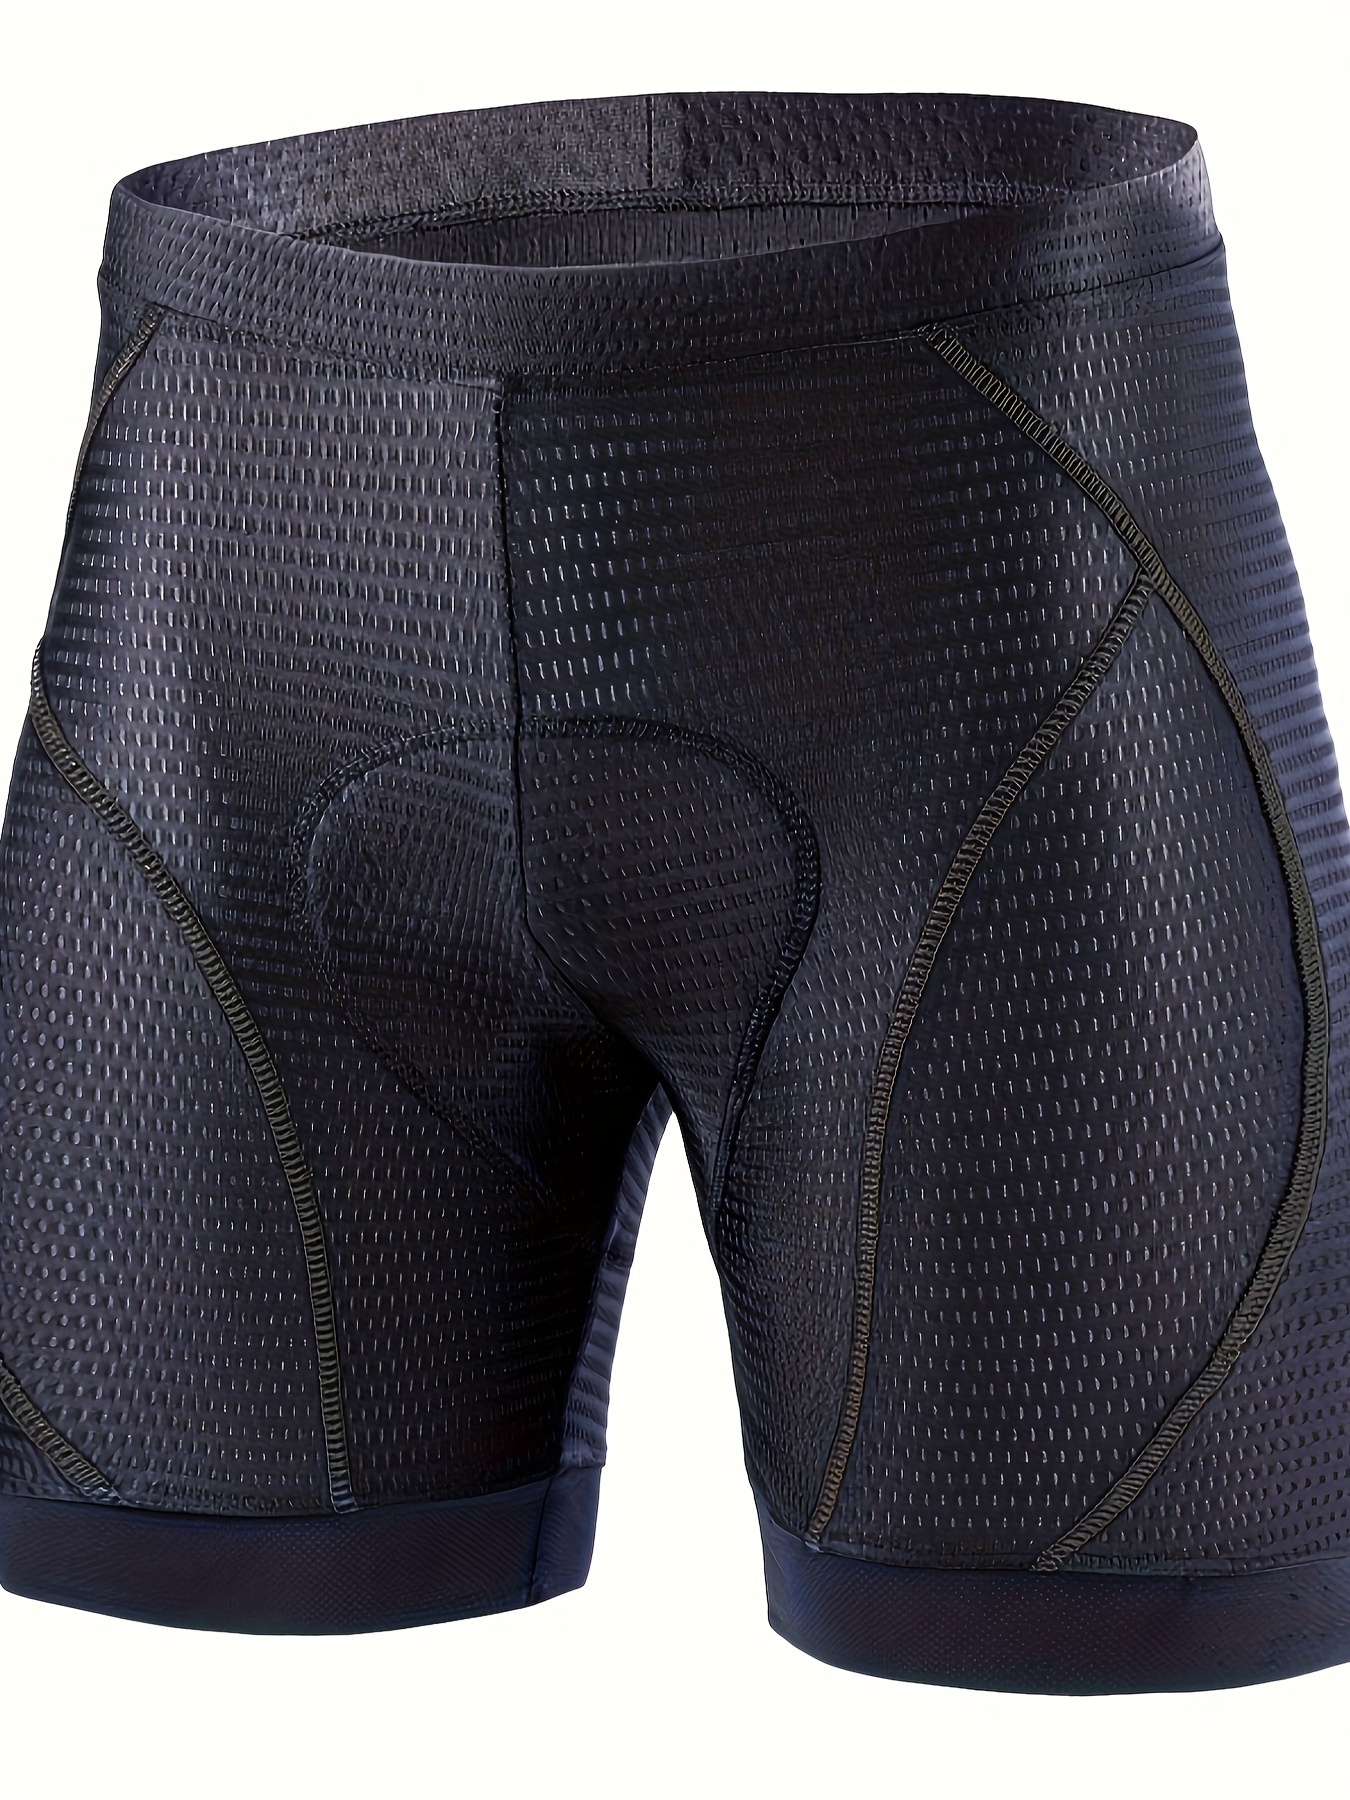 Difos Men's High-density 4d Sponge Padded Cycling Shorts With High  Elasticity, Shop The Latest Trends